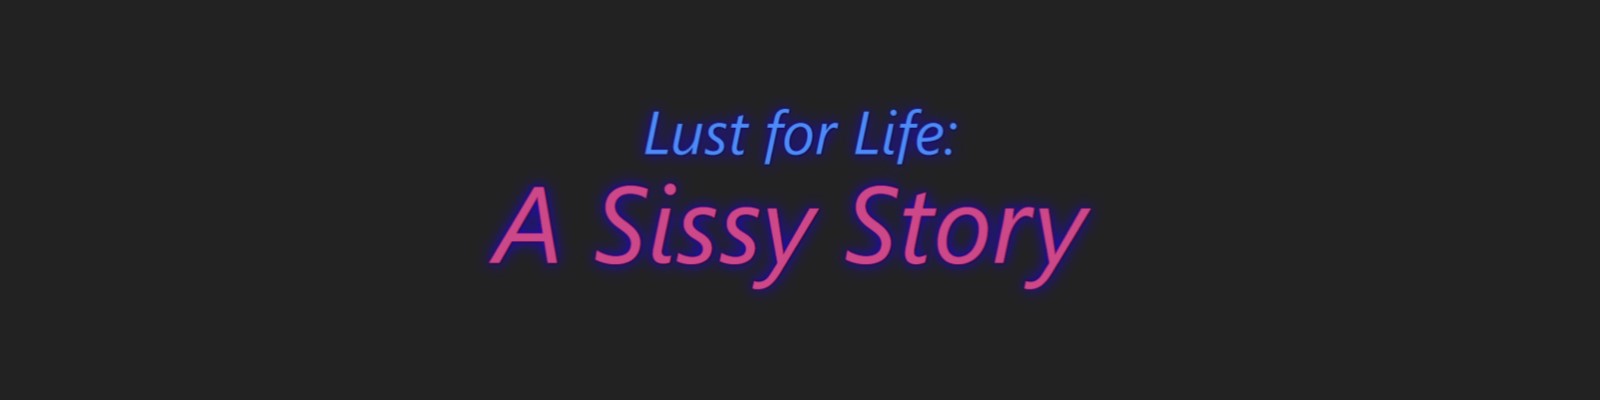 Lust for Life: A Sissy Story poster